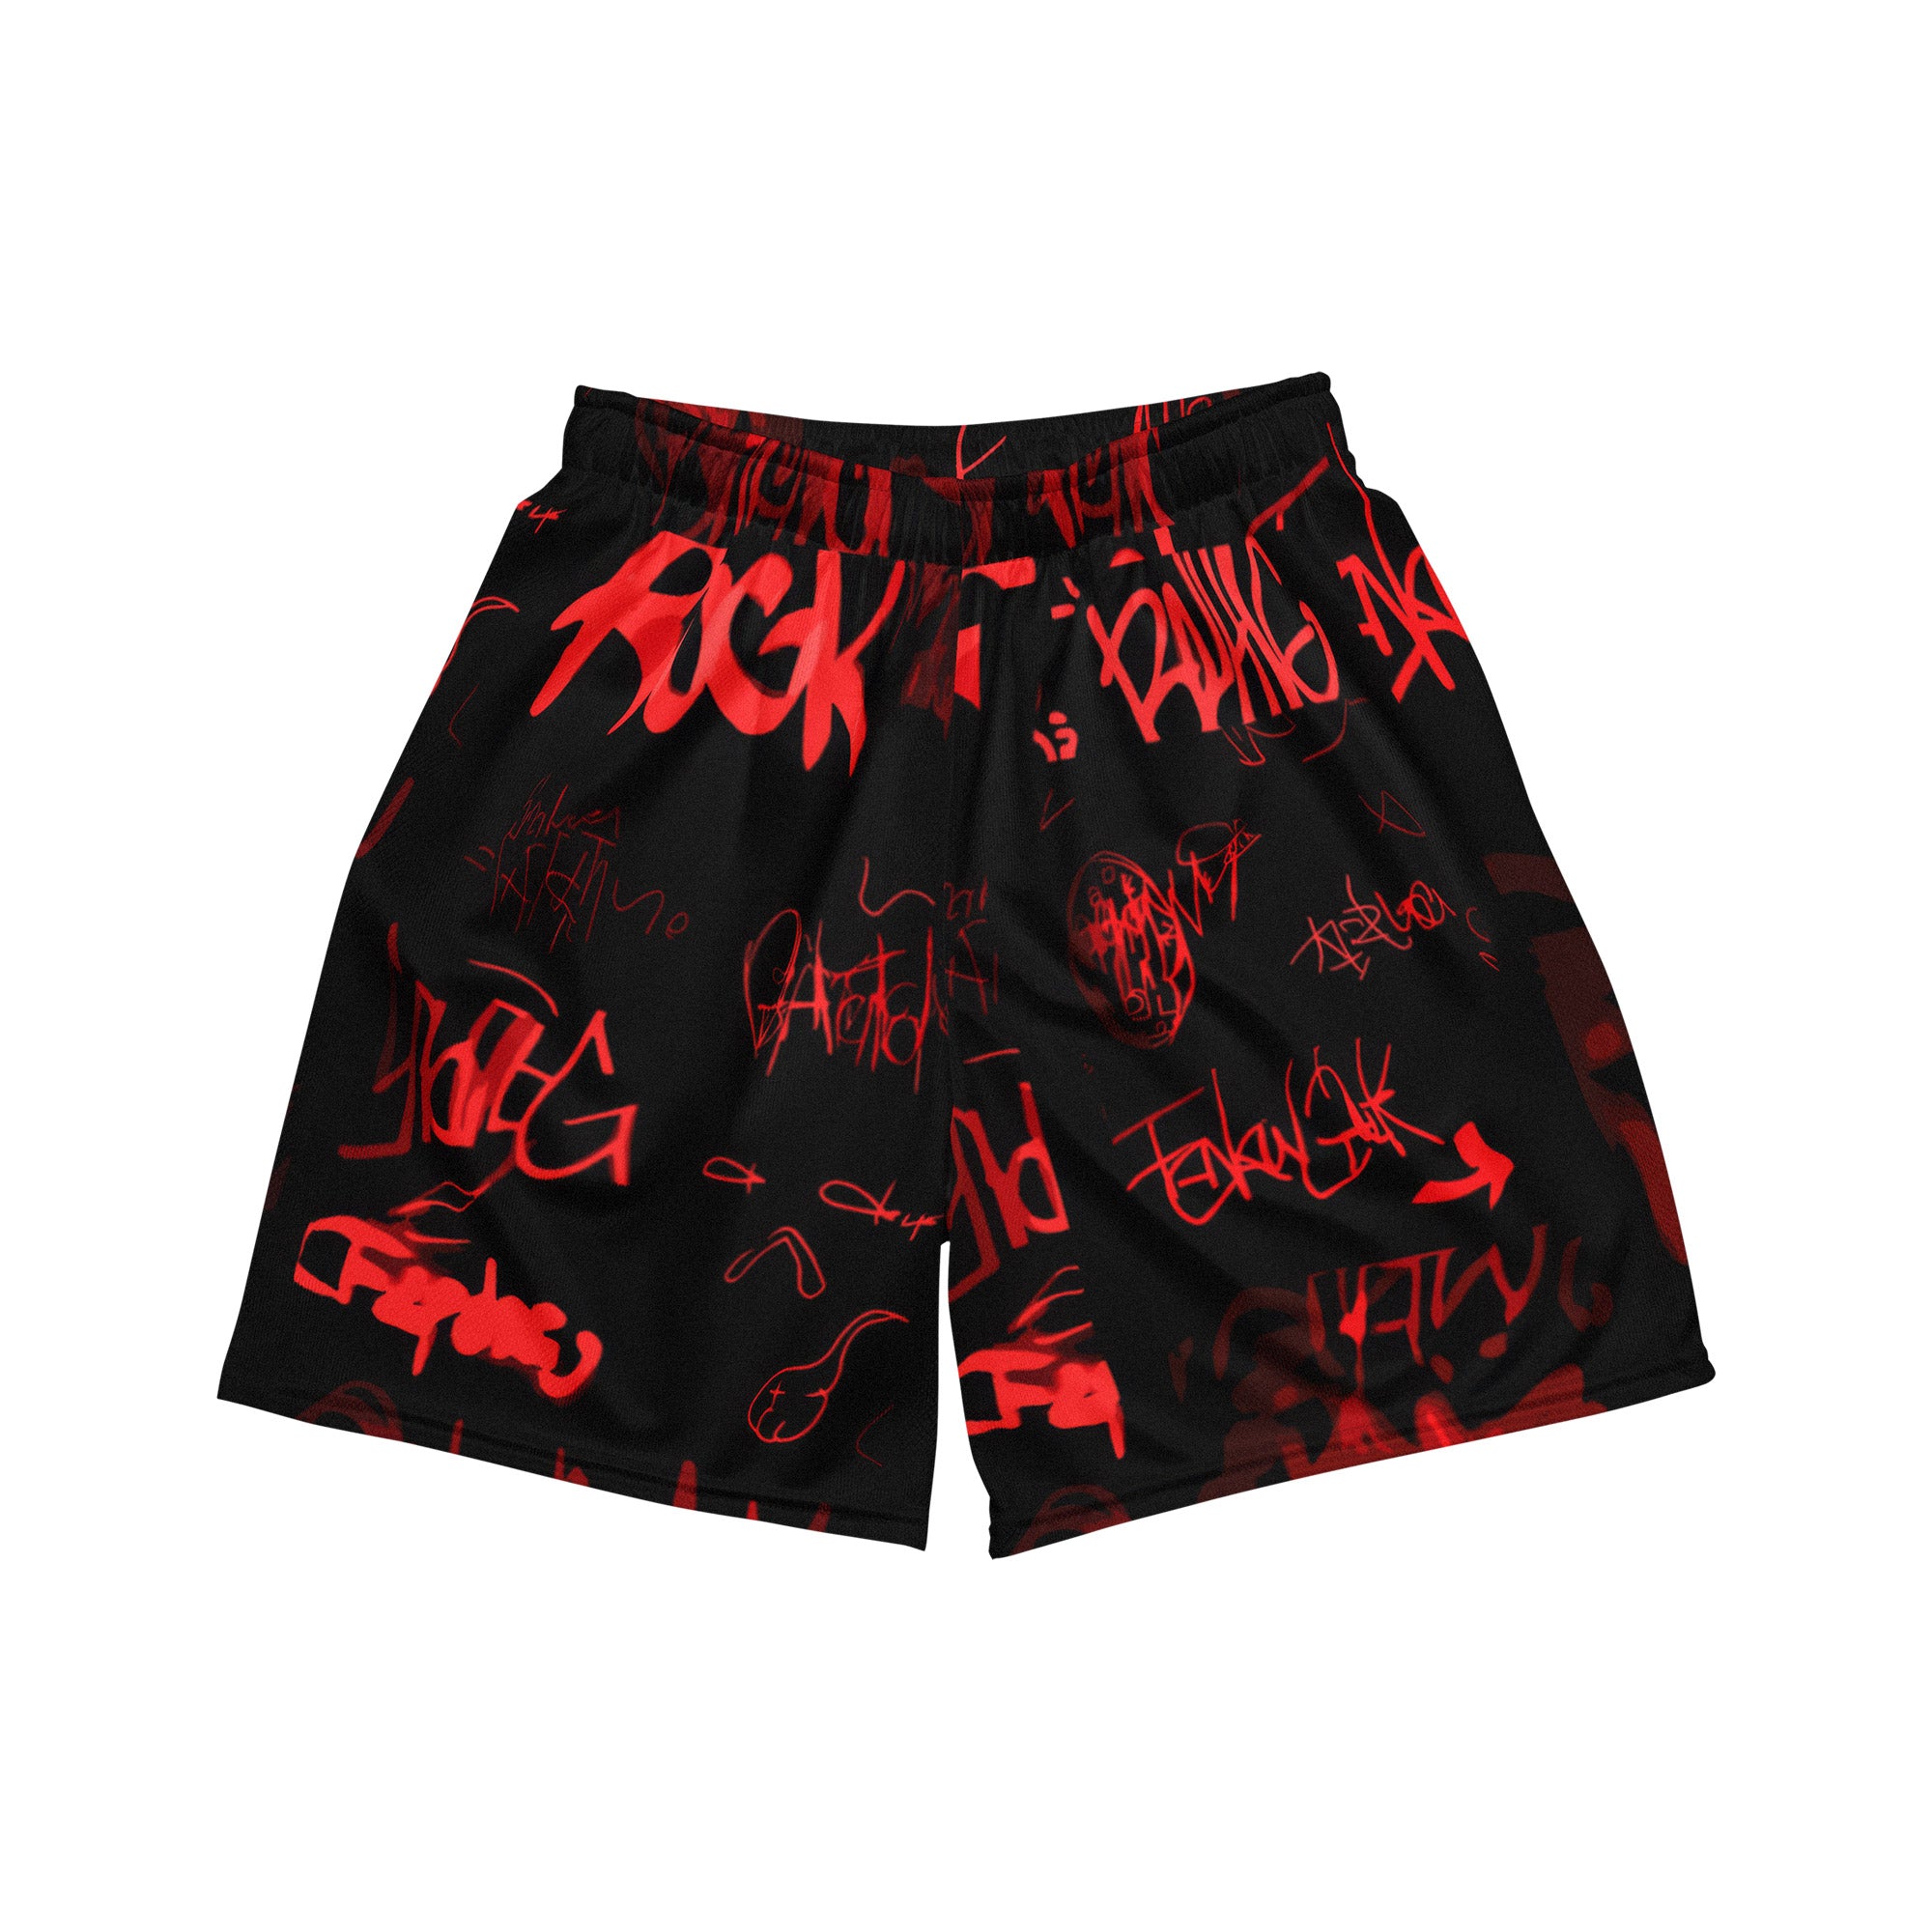 Unisex mesh shorts made from recycled materials embody the perfect blend of functionality and fashion. Designed to accommodate both intense athletic activities and trendy streetwear red Tokyo Arkade